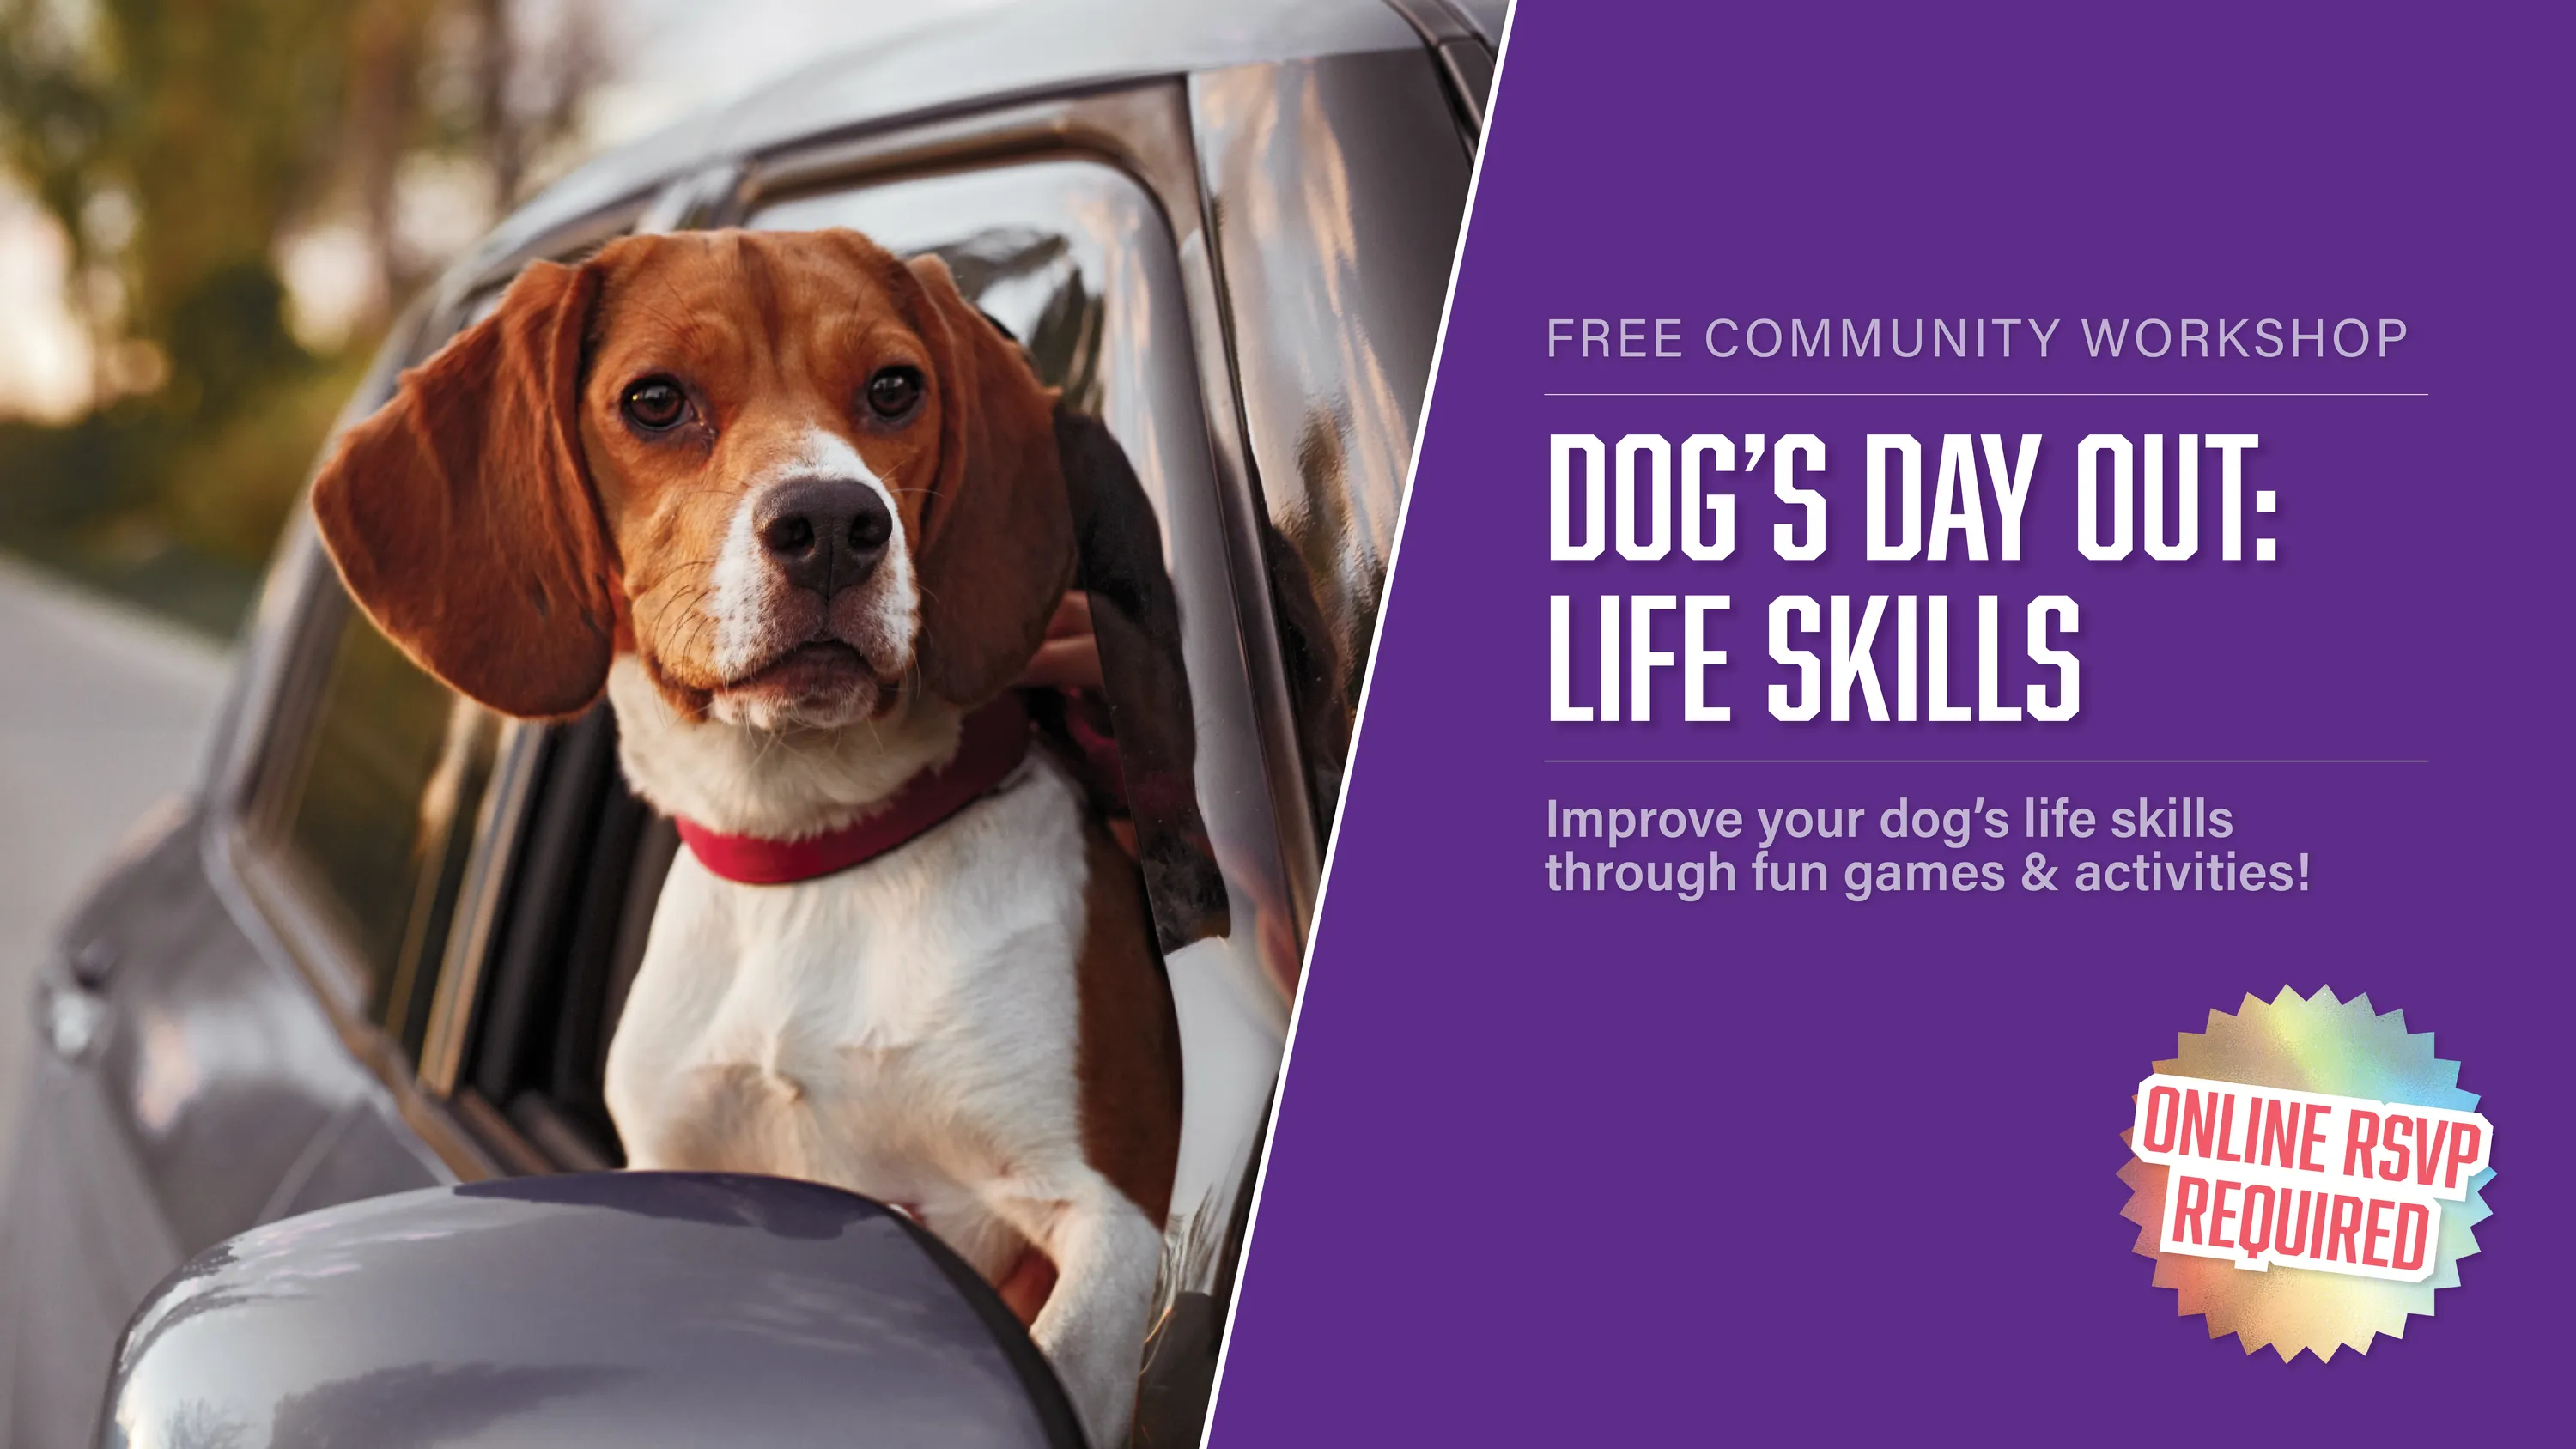 Dog's Day Out: Life Skills